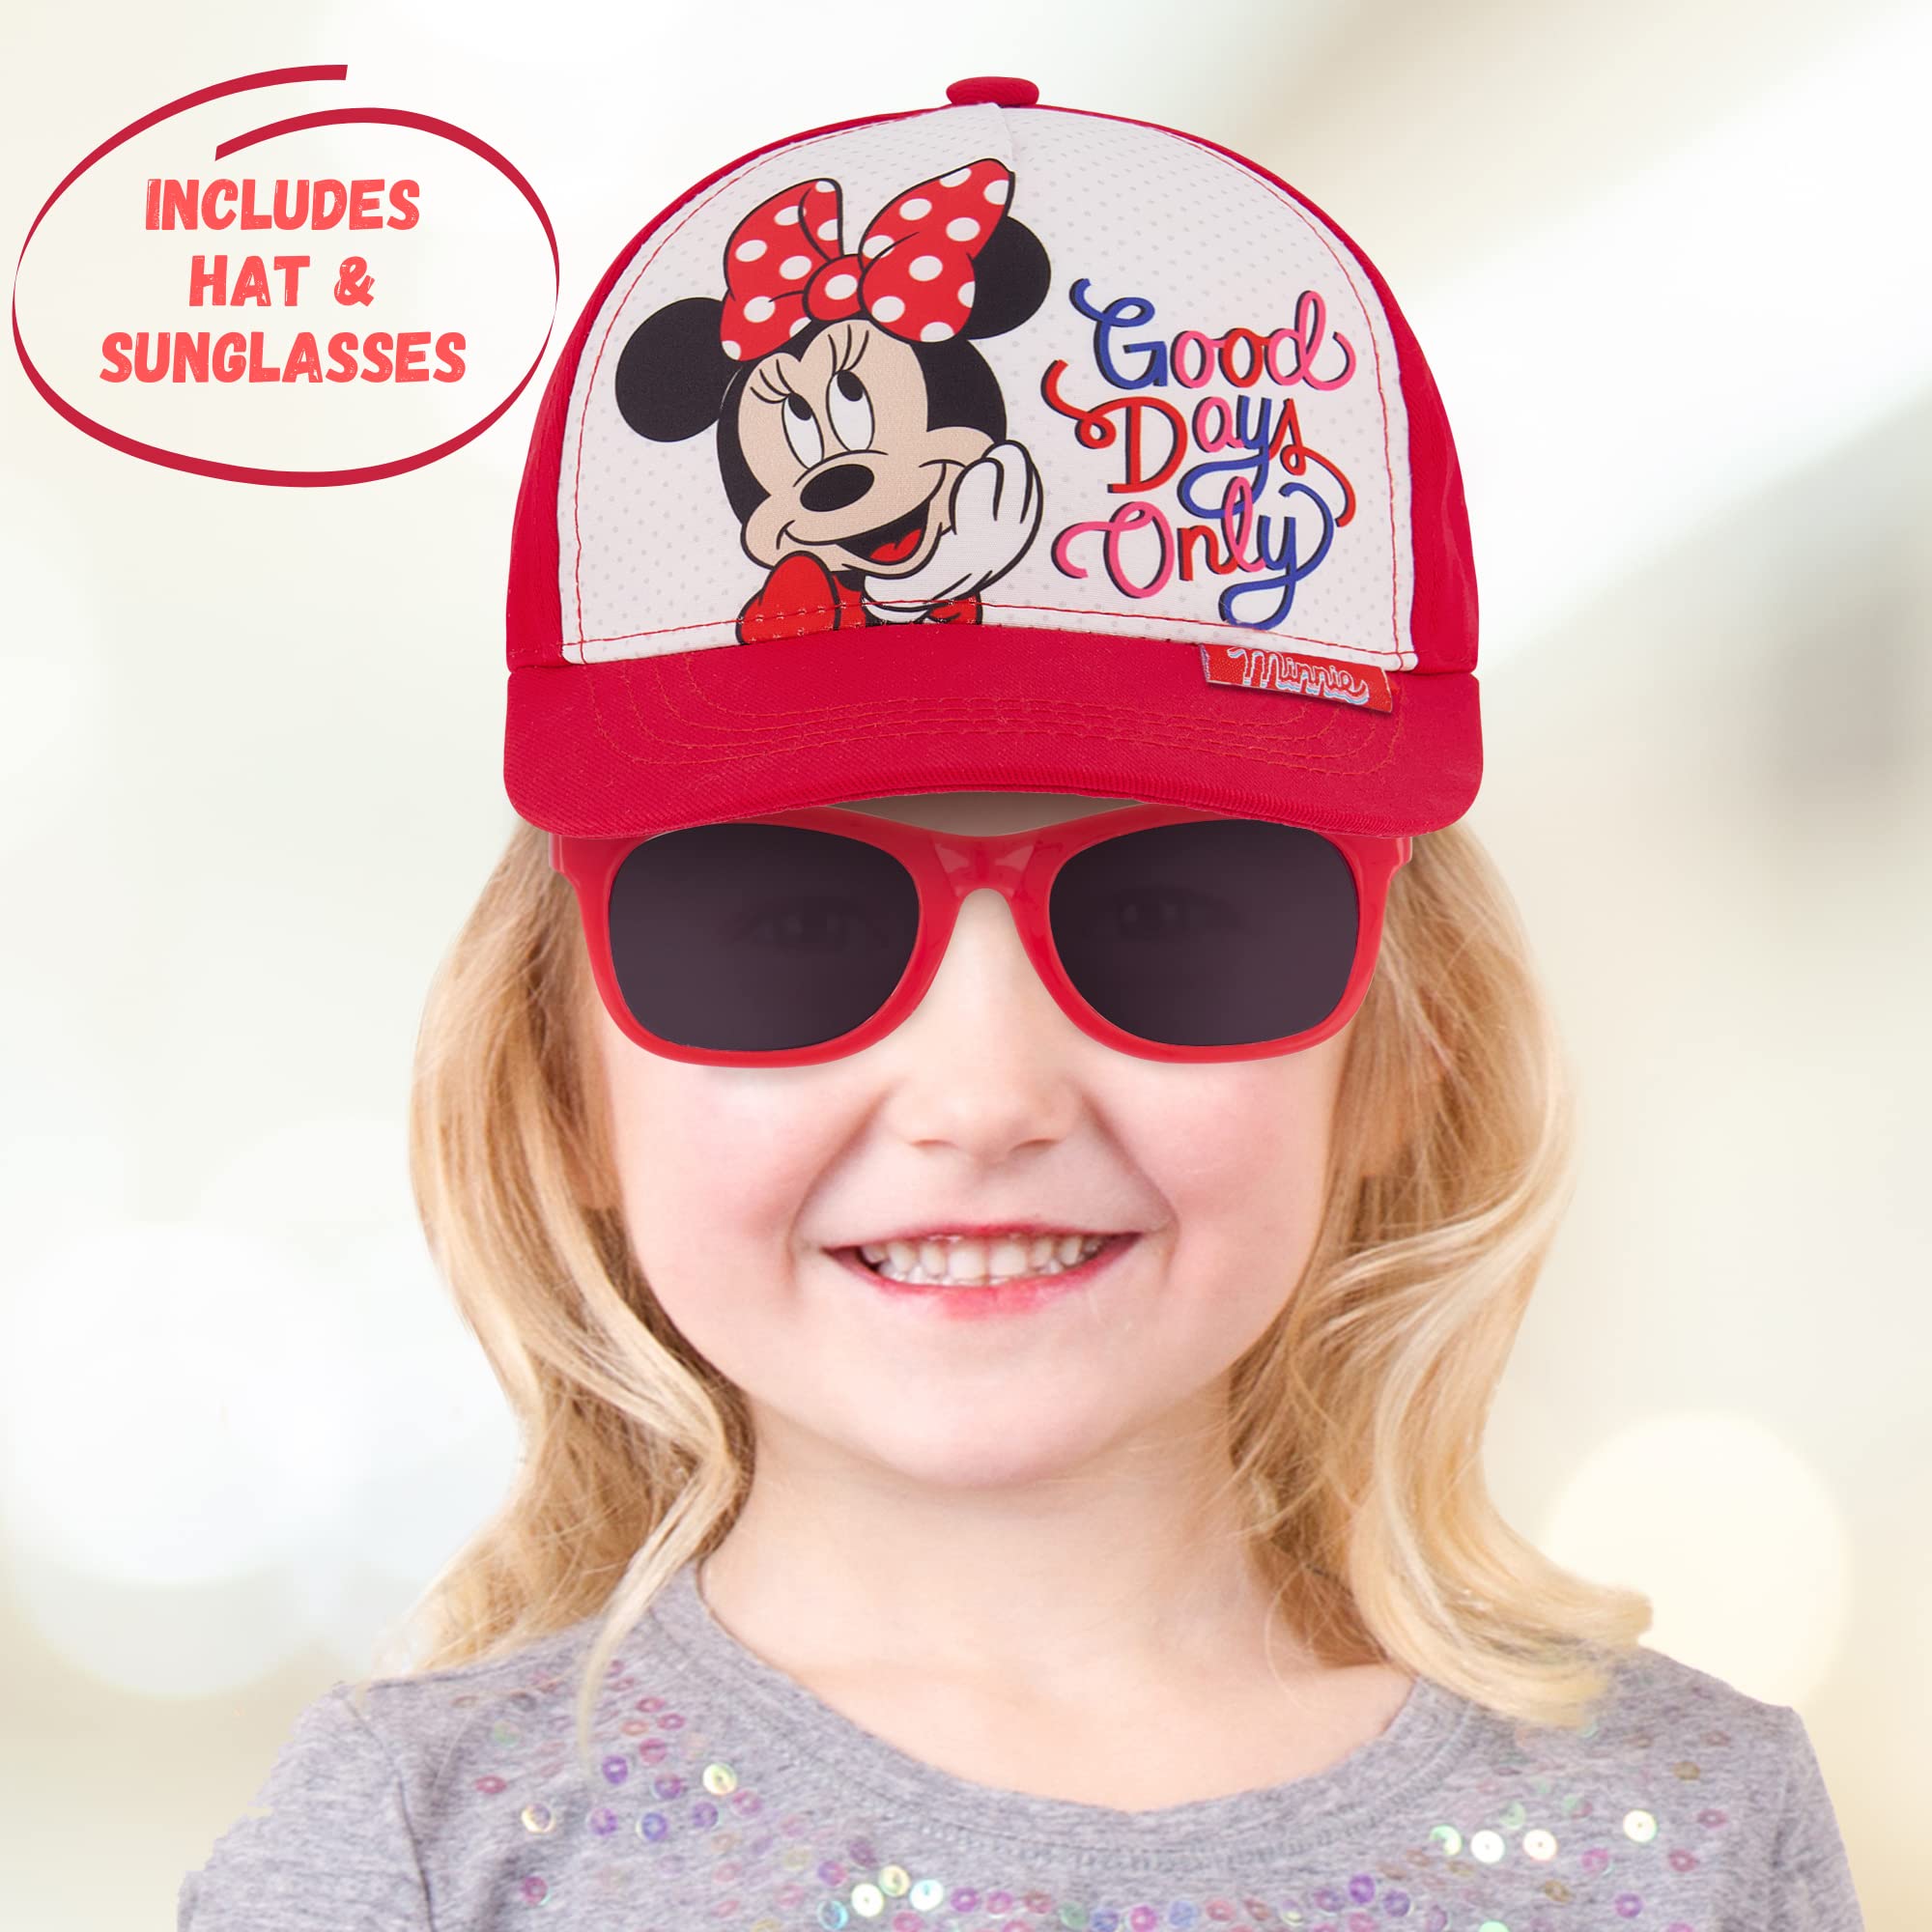 ABG Accessories Baby Little Abg Baseball Hat for Girl’s Ages 2-4, Kids Cap & Sunglasses